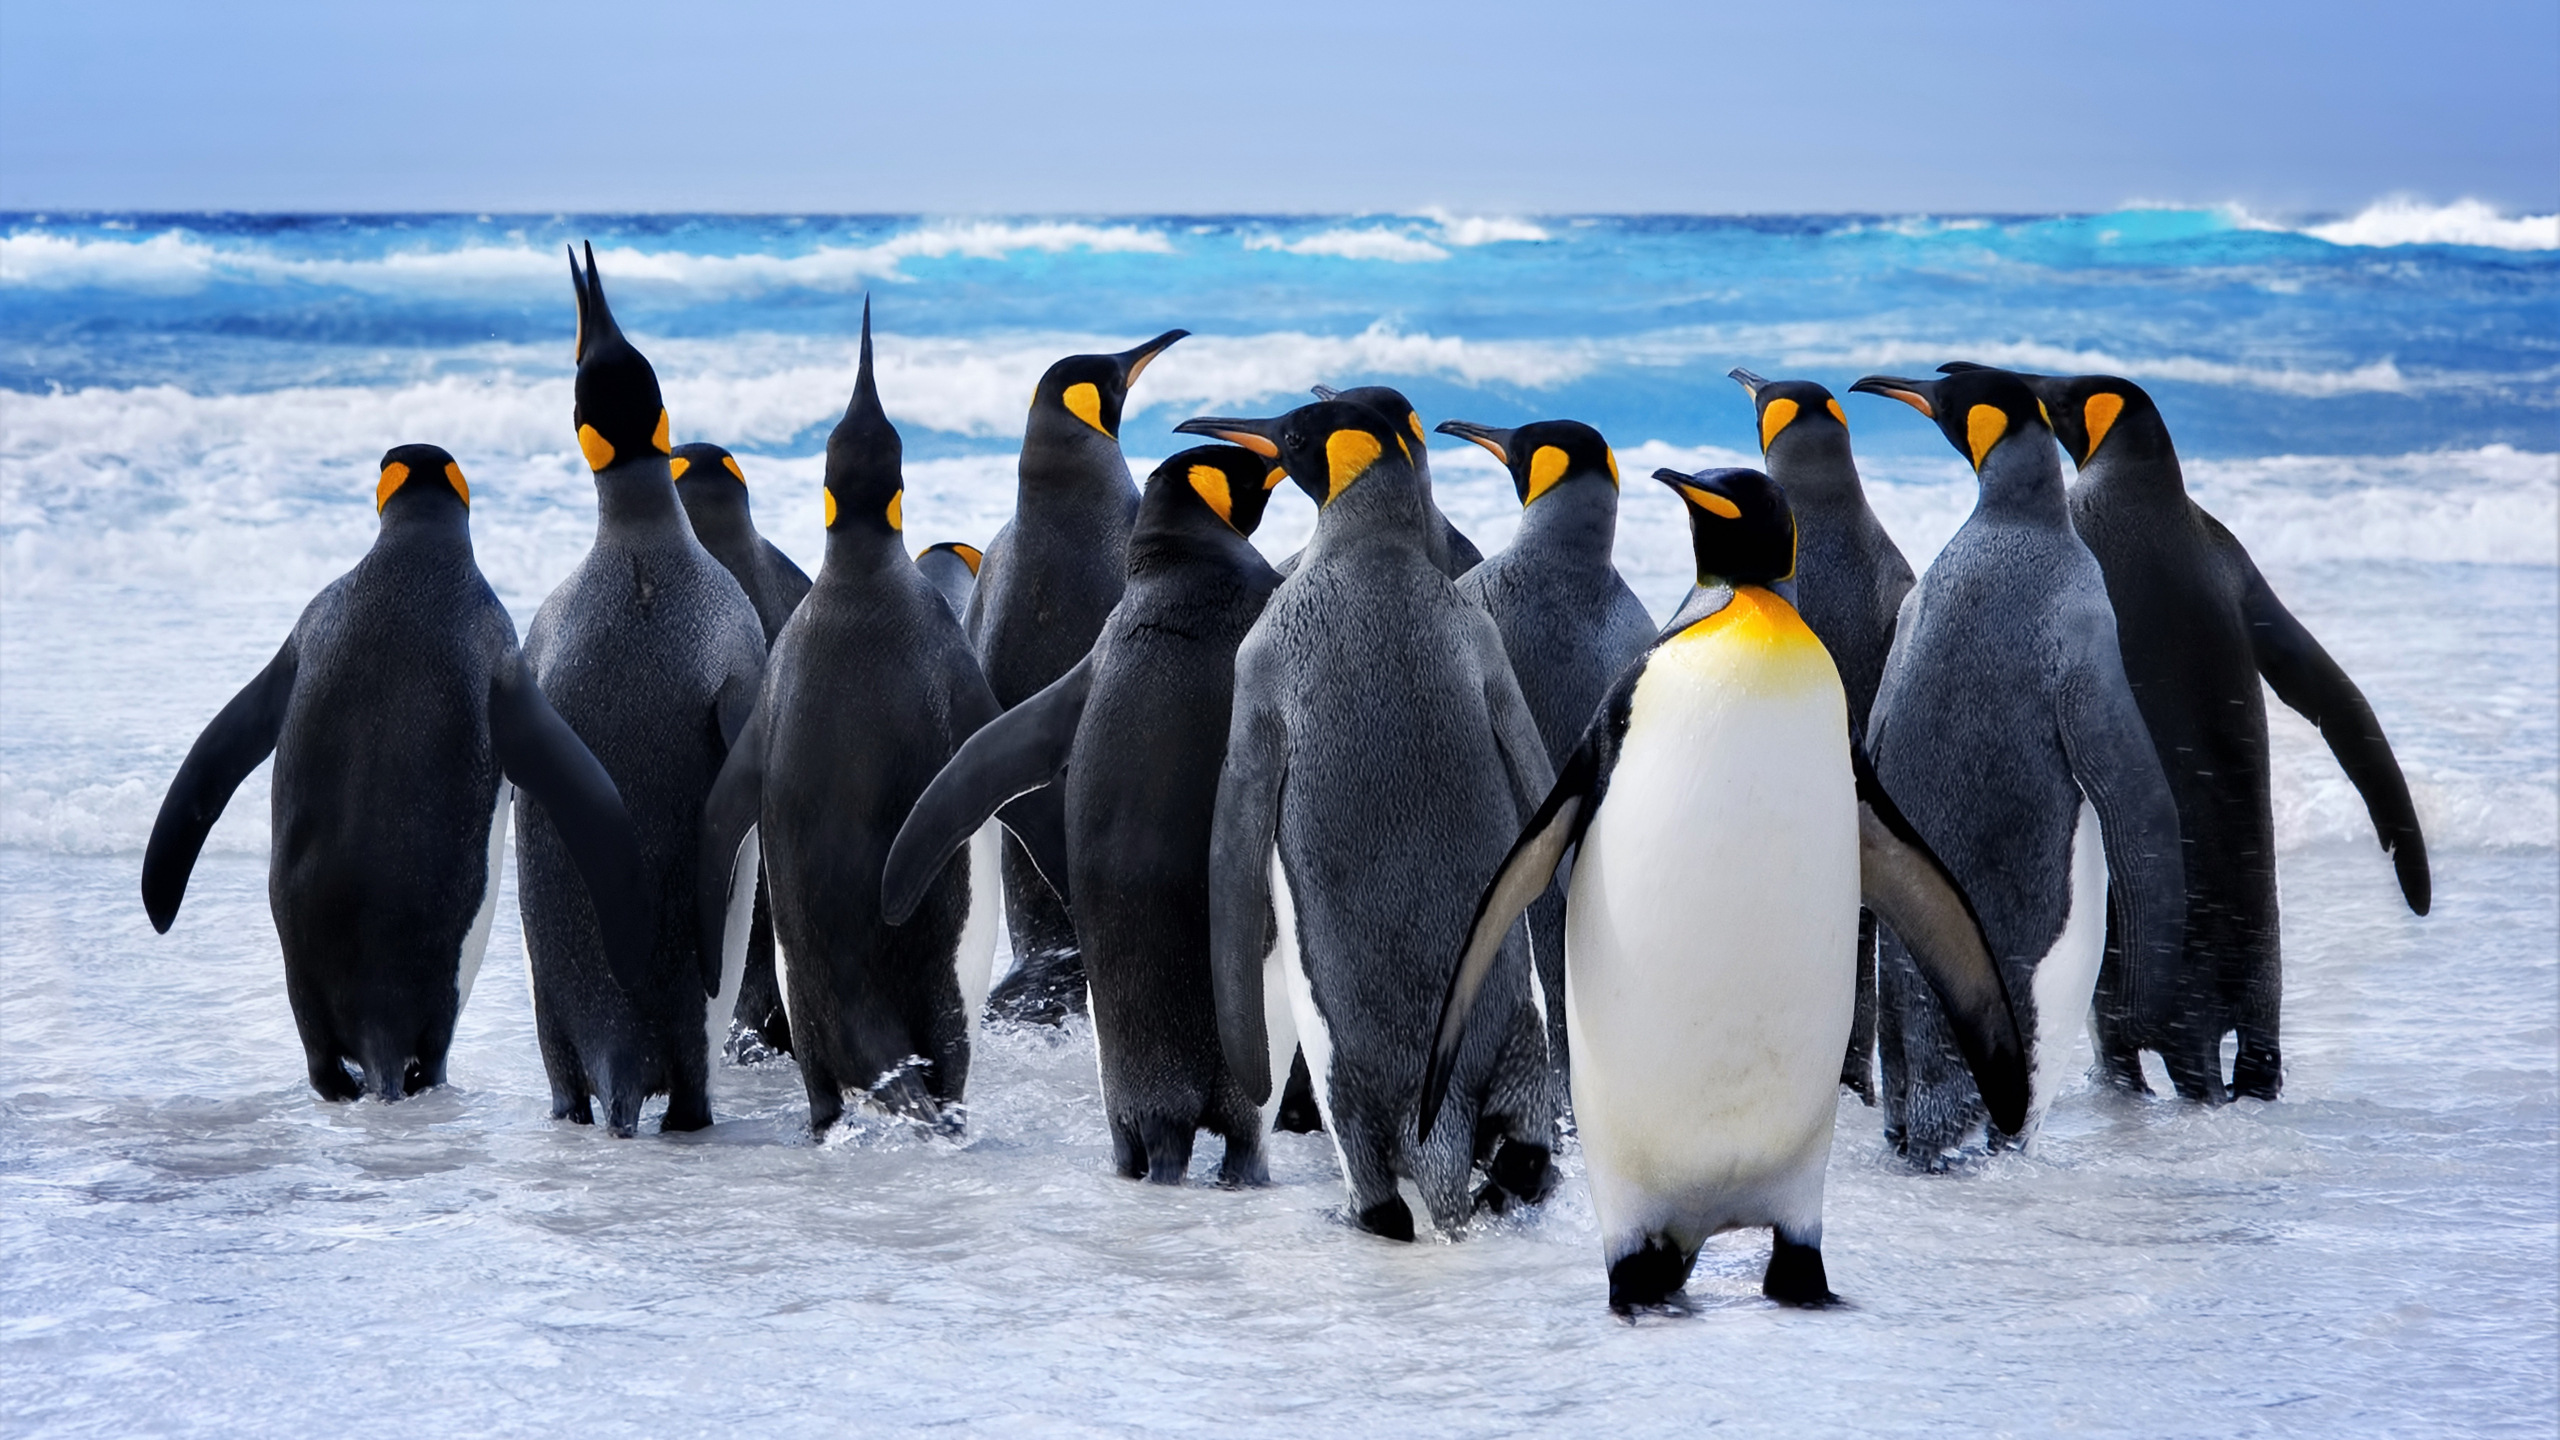 Download wallpaper 2560x1440 king penguin at beach, animals, dual wide 16:9  2560x1440 hd background, 1201